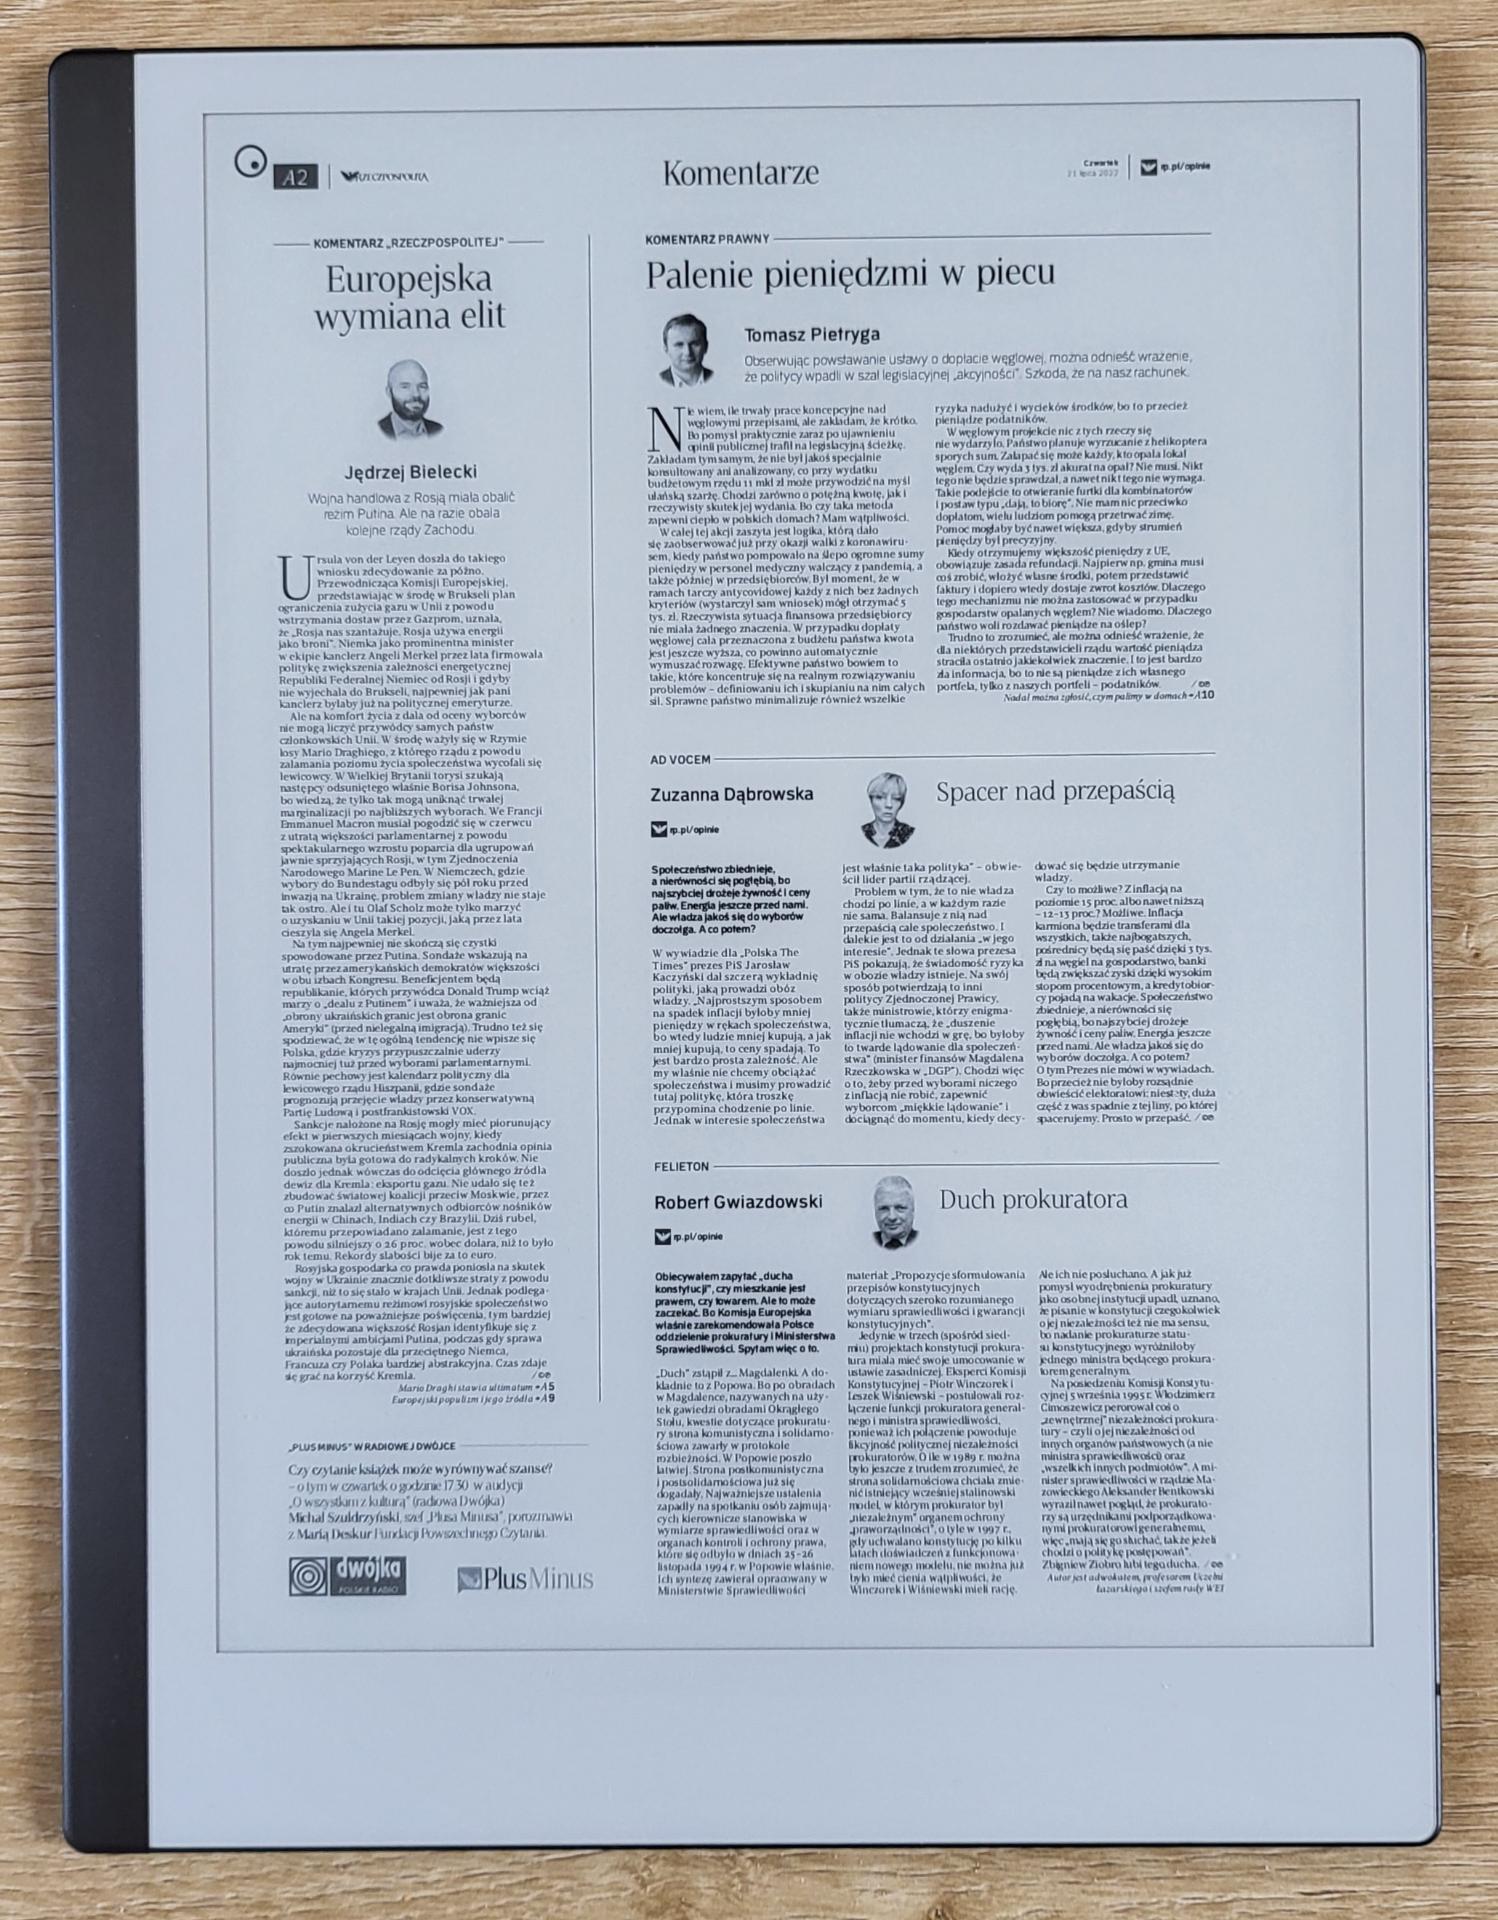 Newspaper PDF as shown on Remarkable 2 tablet